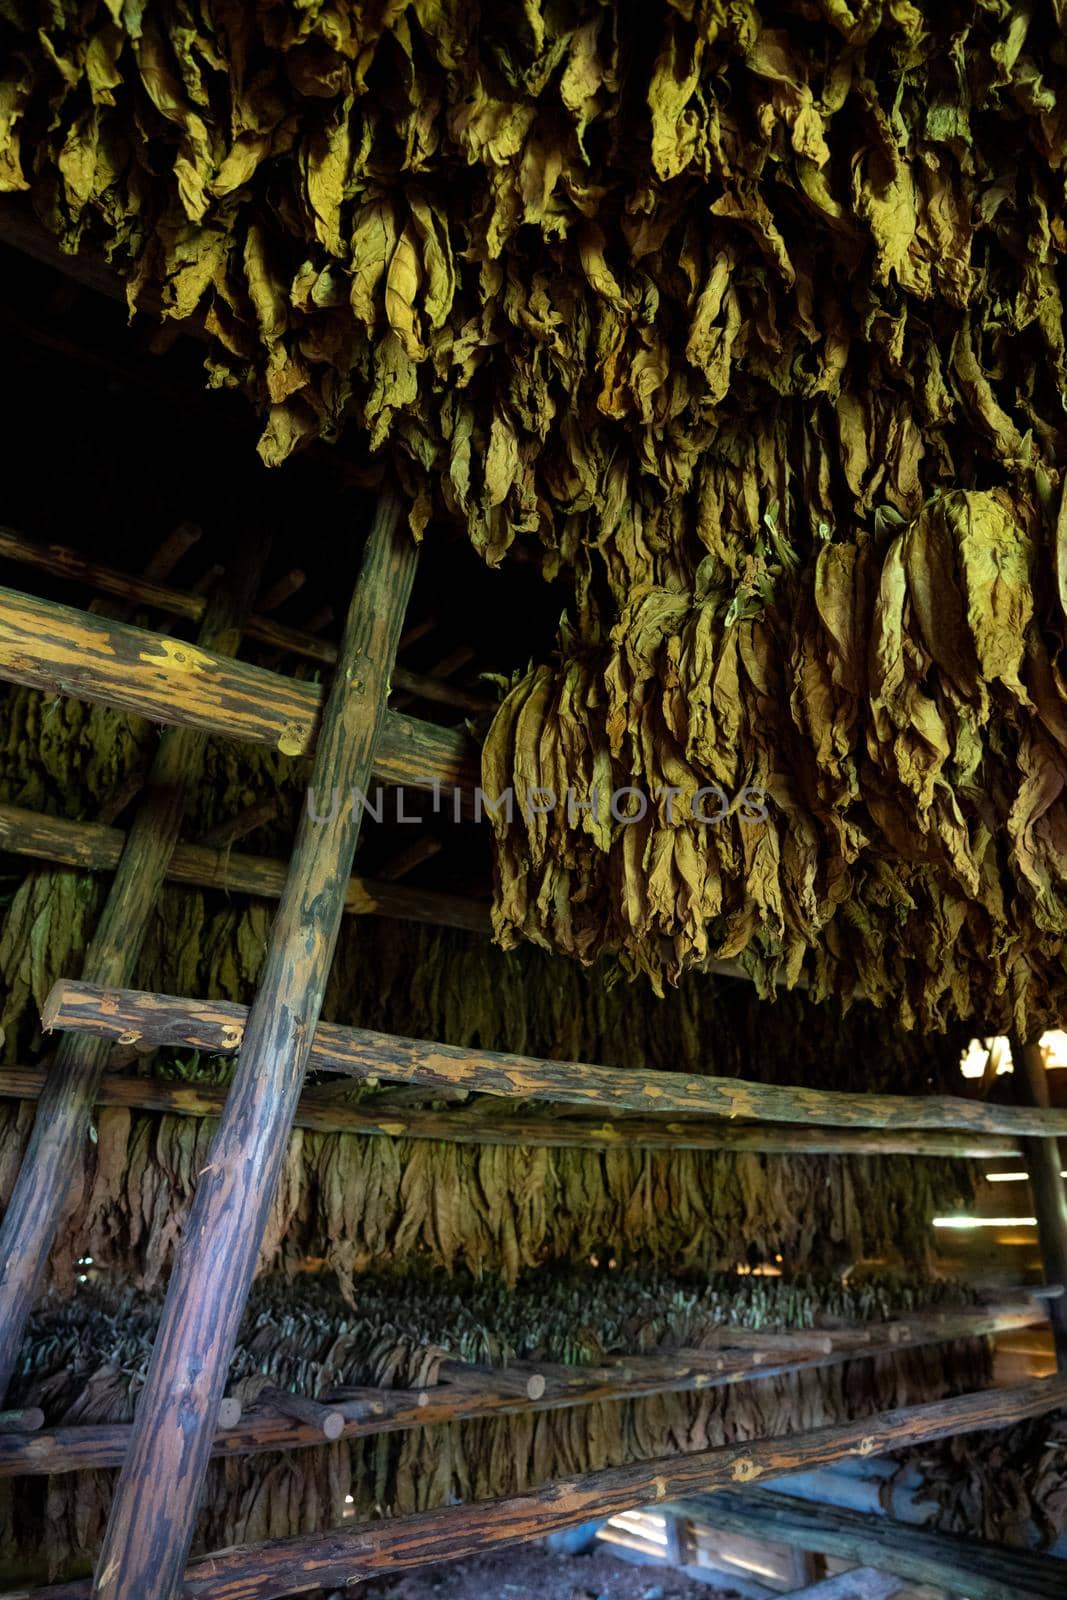 Tobacco drying, inside a shed or barn for drying tobacco leaves in Cuba Pinar del Rio province